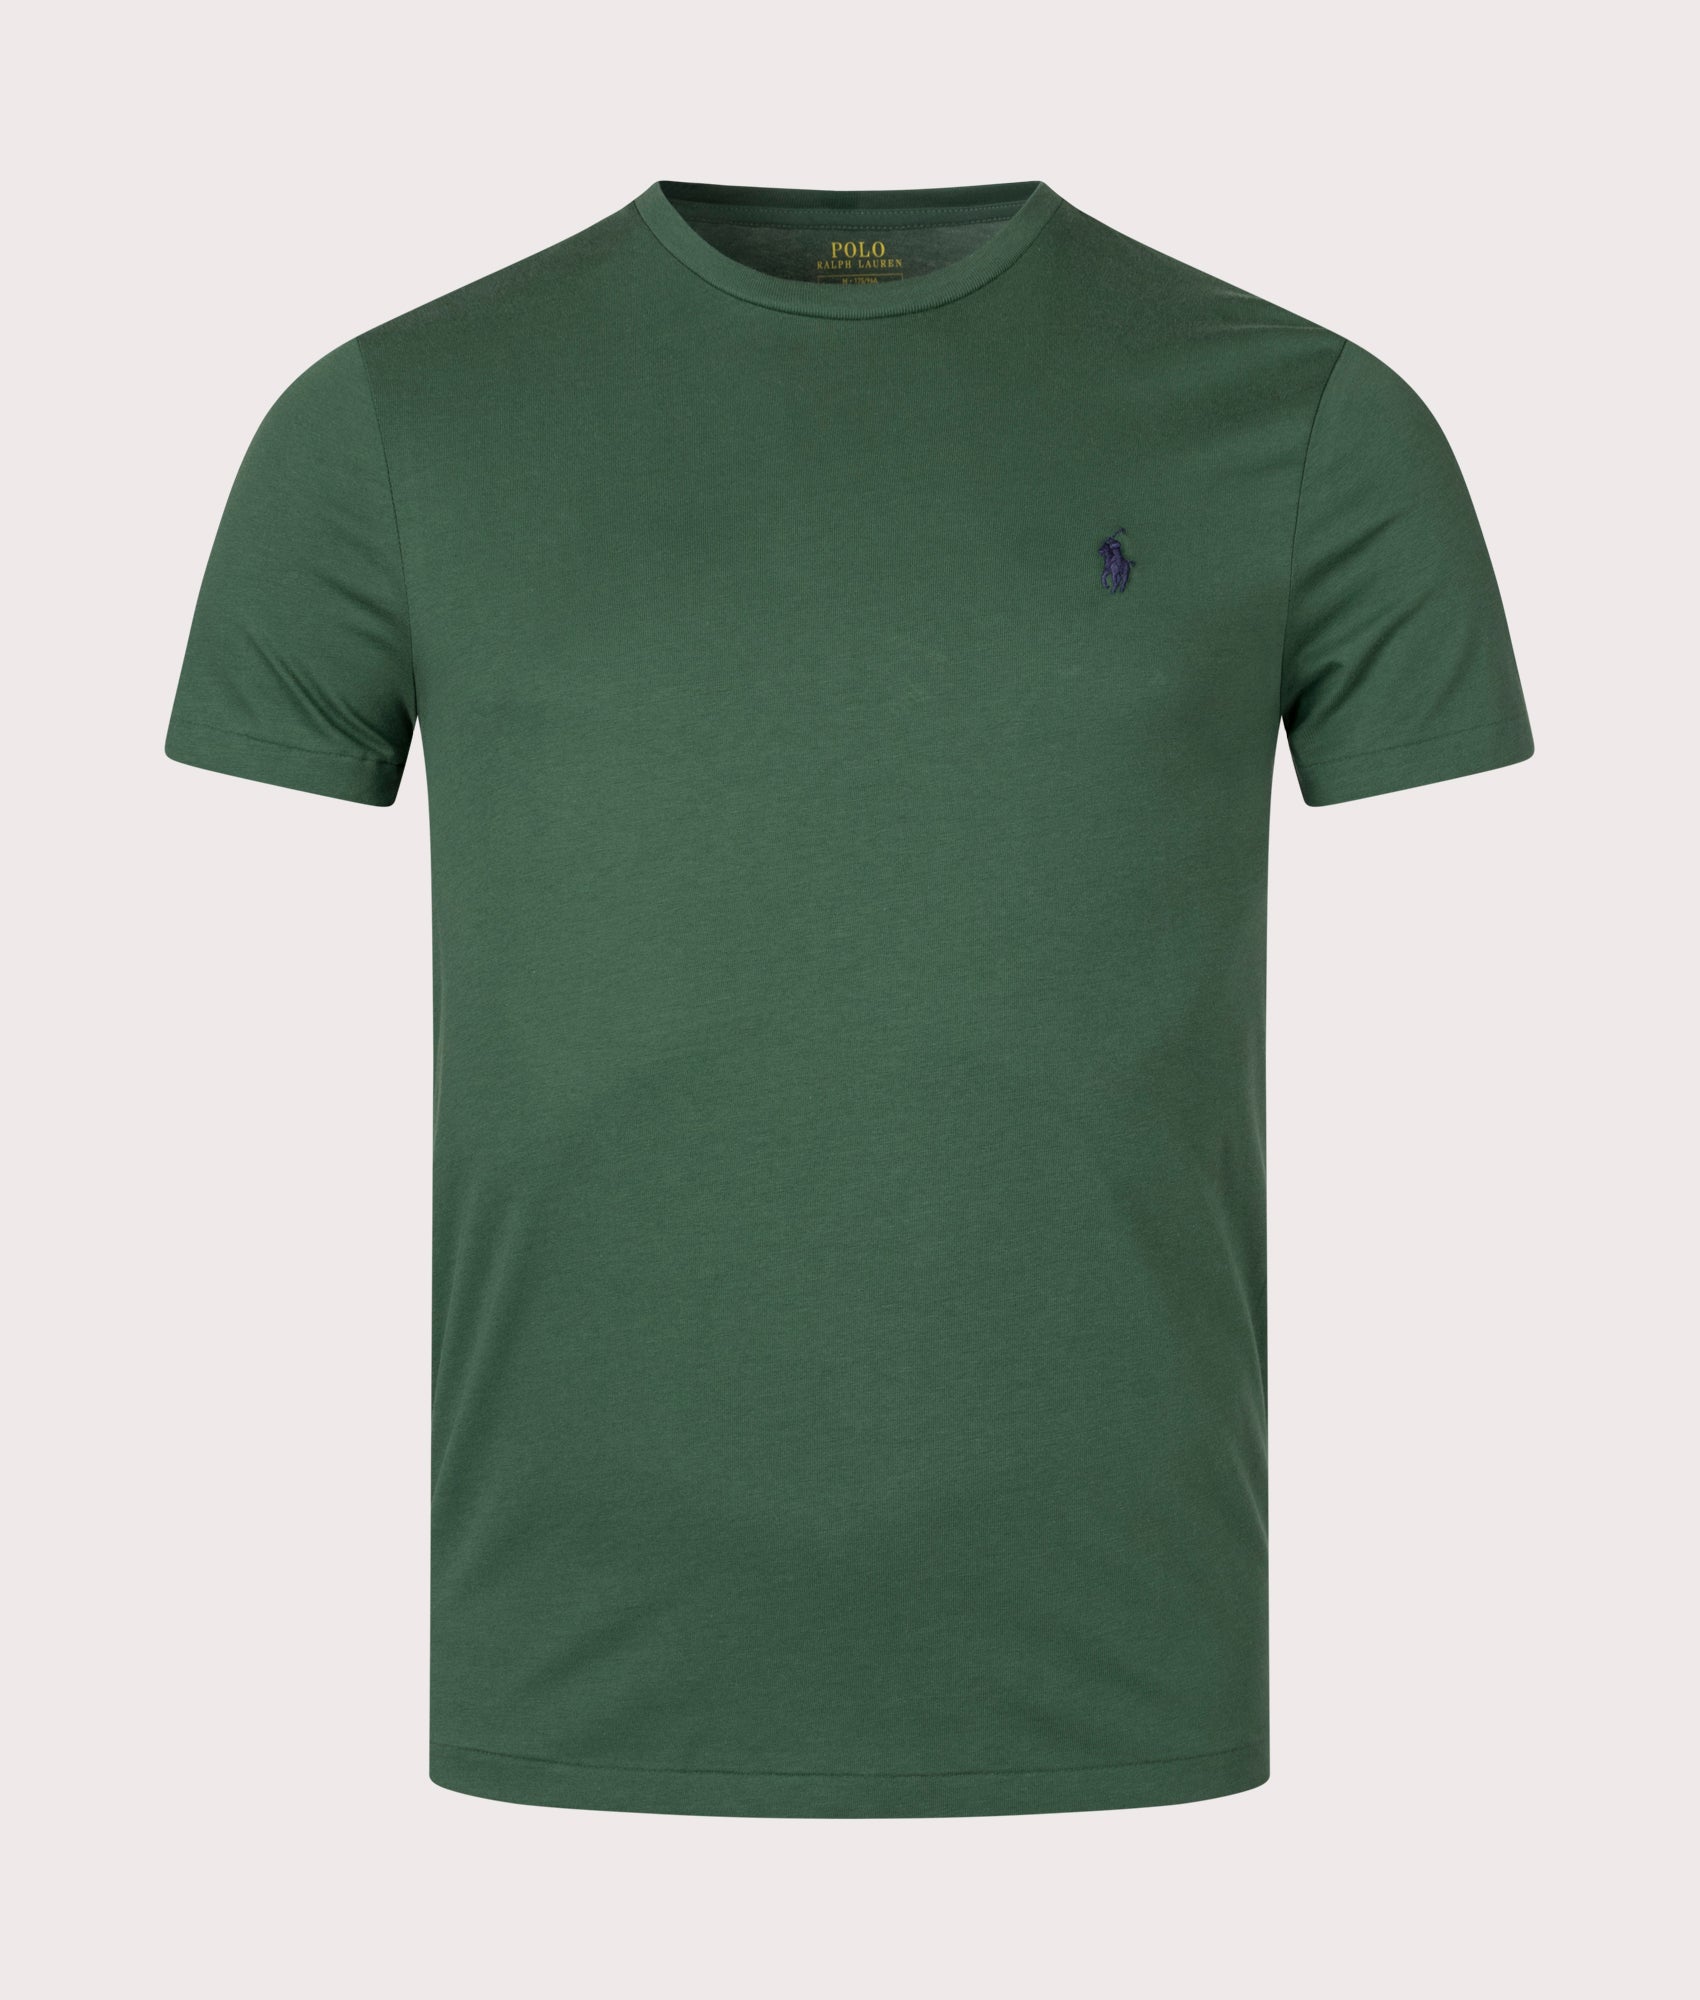 Polo Ralph Lauren Mens Custom Slim Fit T-Shirt - Colour: 323 Washed Forest - Size: Large